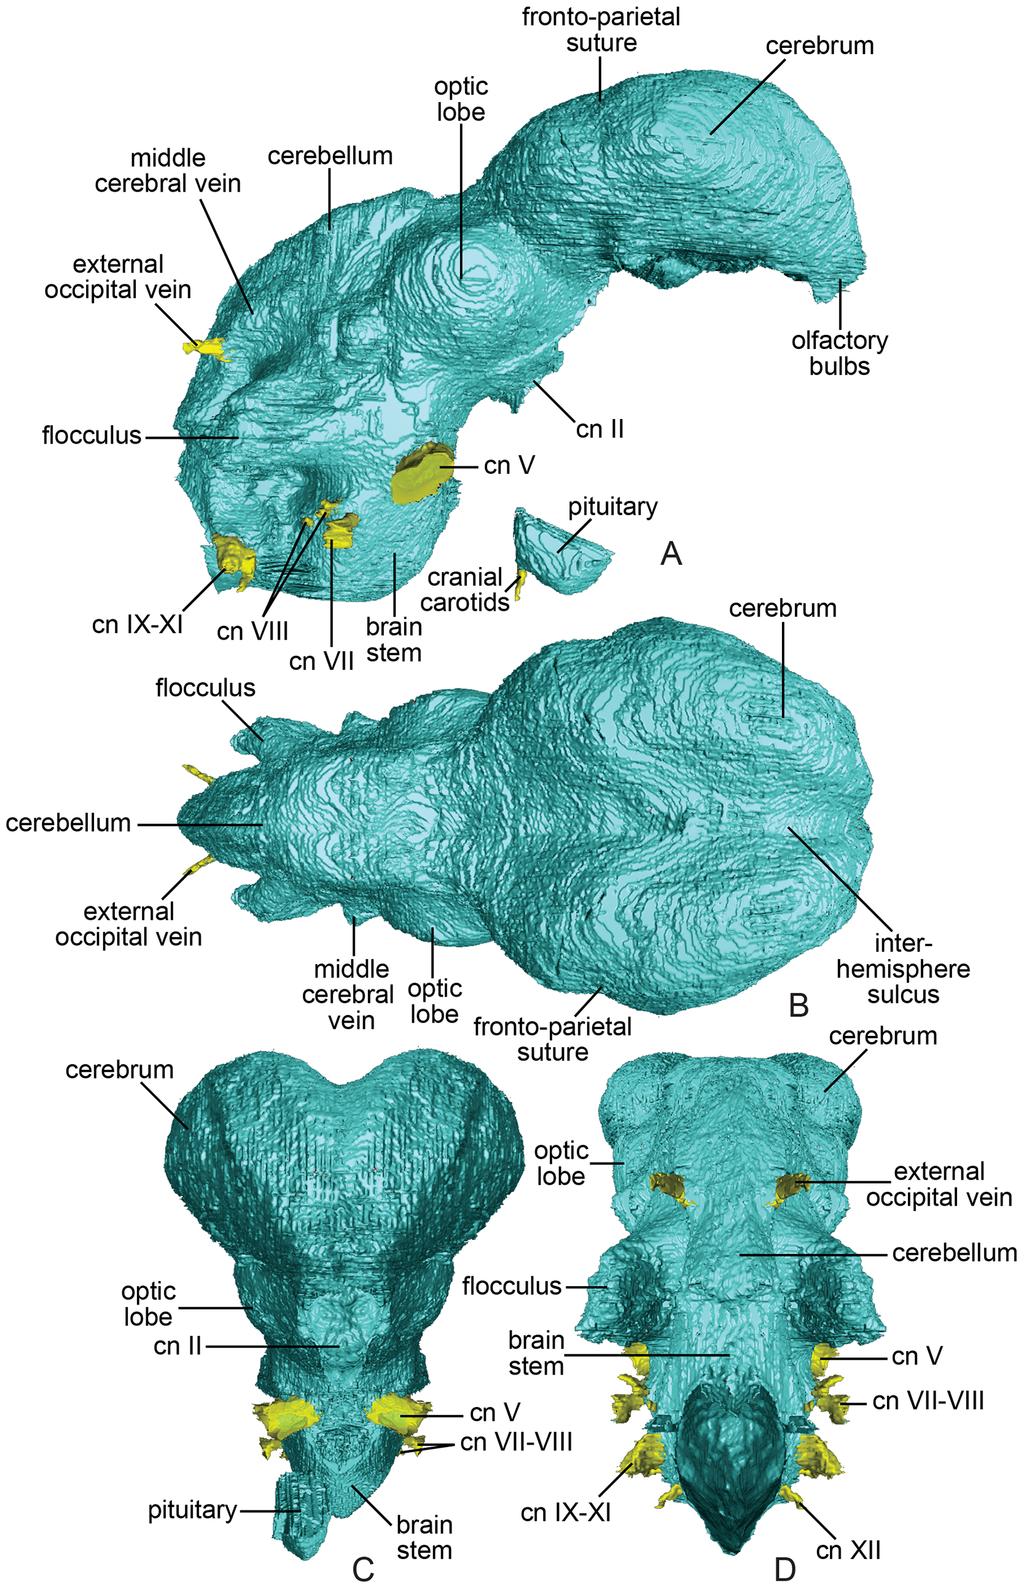 Reconsidering Avian Nature of Oviraptorosaur Brain Fig. 2. Endocast of Conchoraptor gracilis (IGM 100/3006) in (A) right lateral; (B), dorsal; (C), rostral; and (D), caudal views. doi:10.1371/journal.